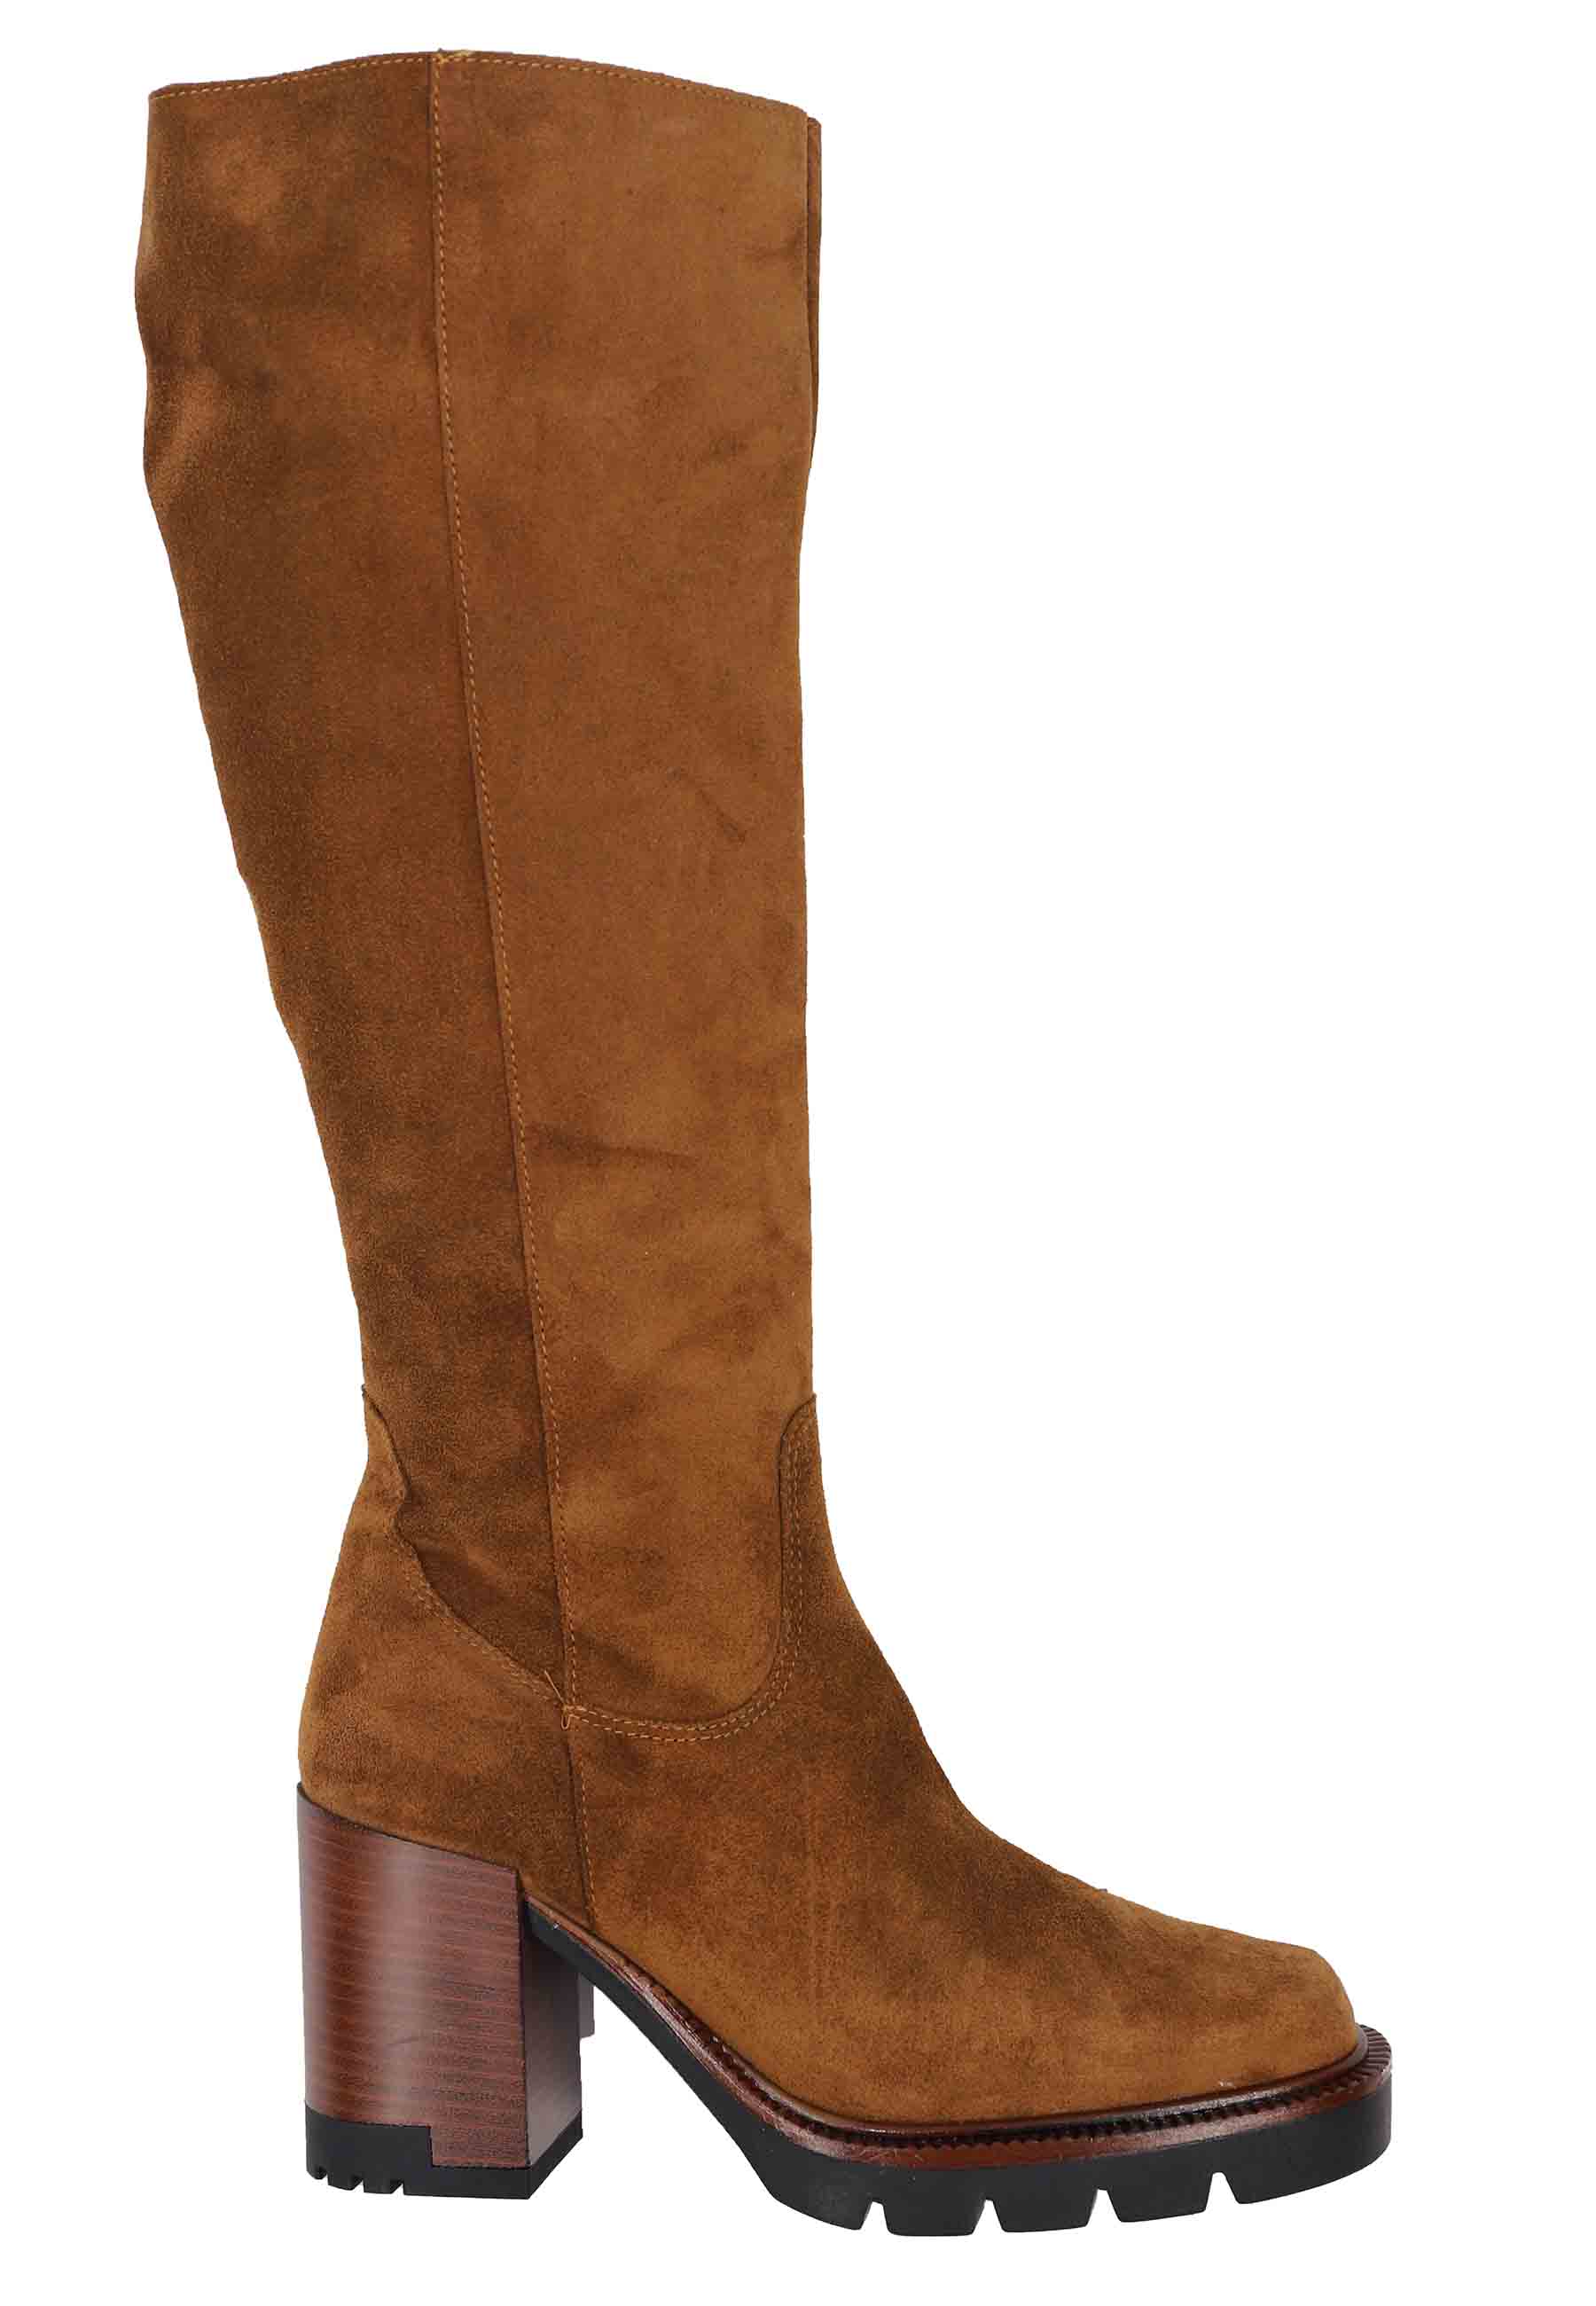 Women's boots in leather suede with rubber heel and platform